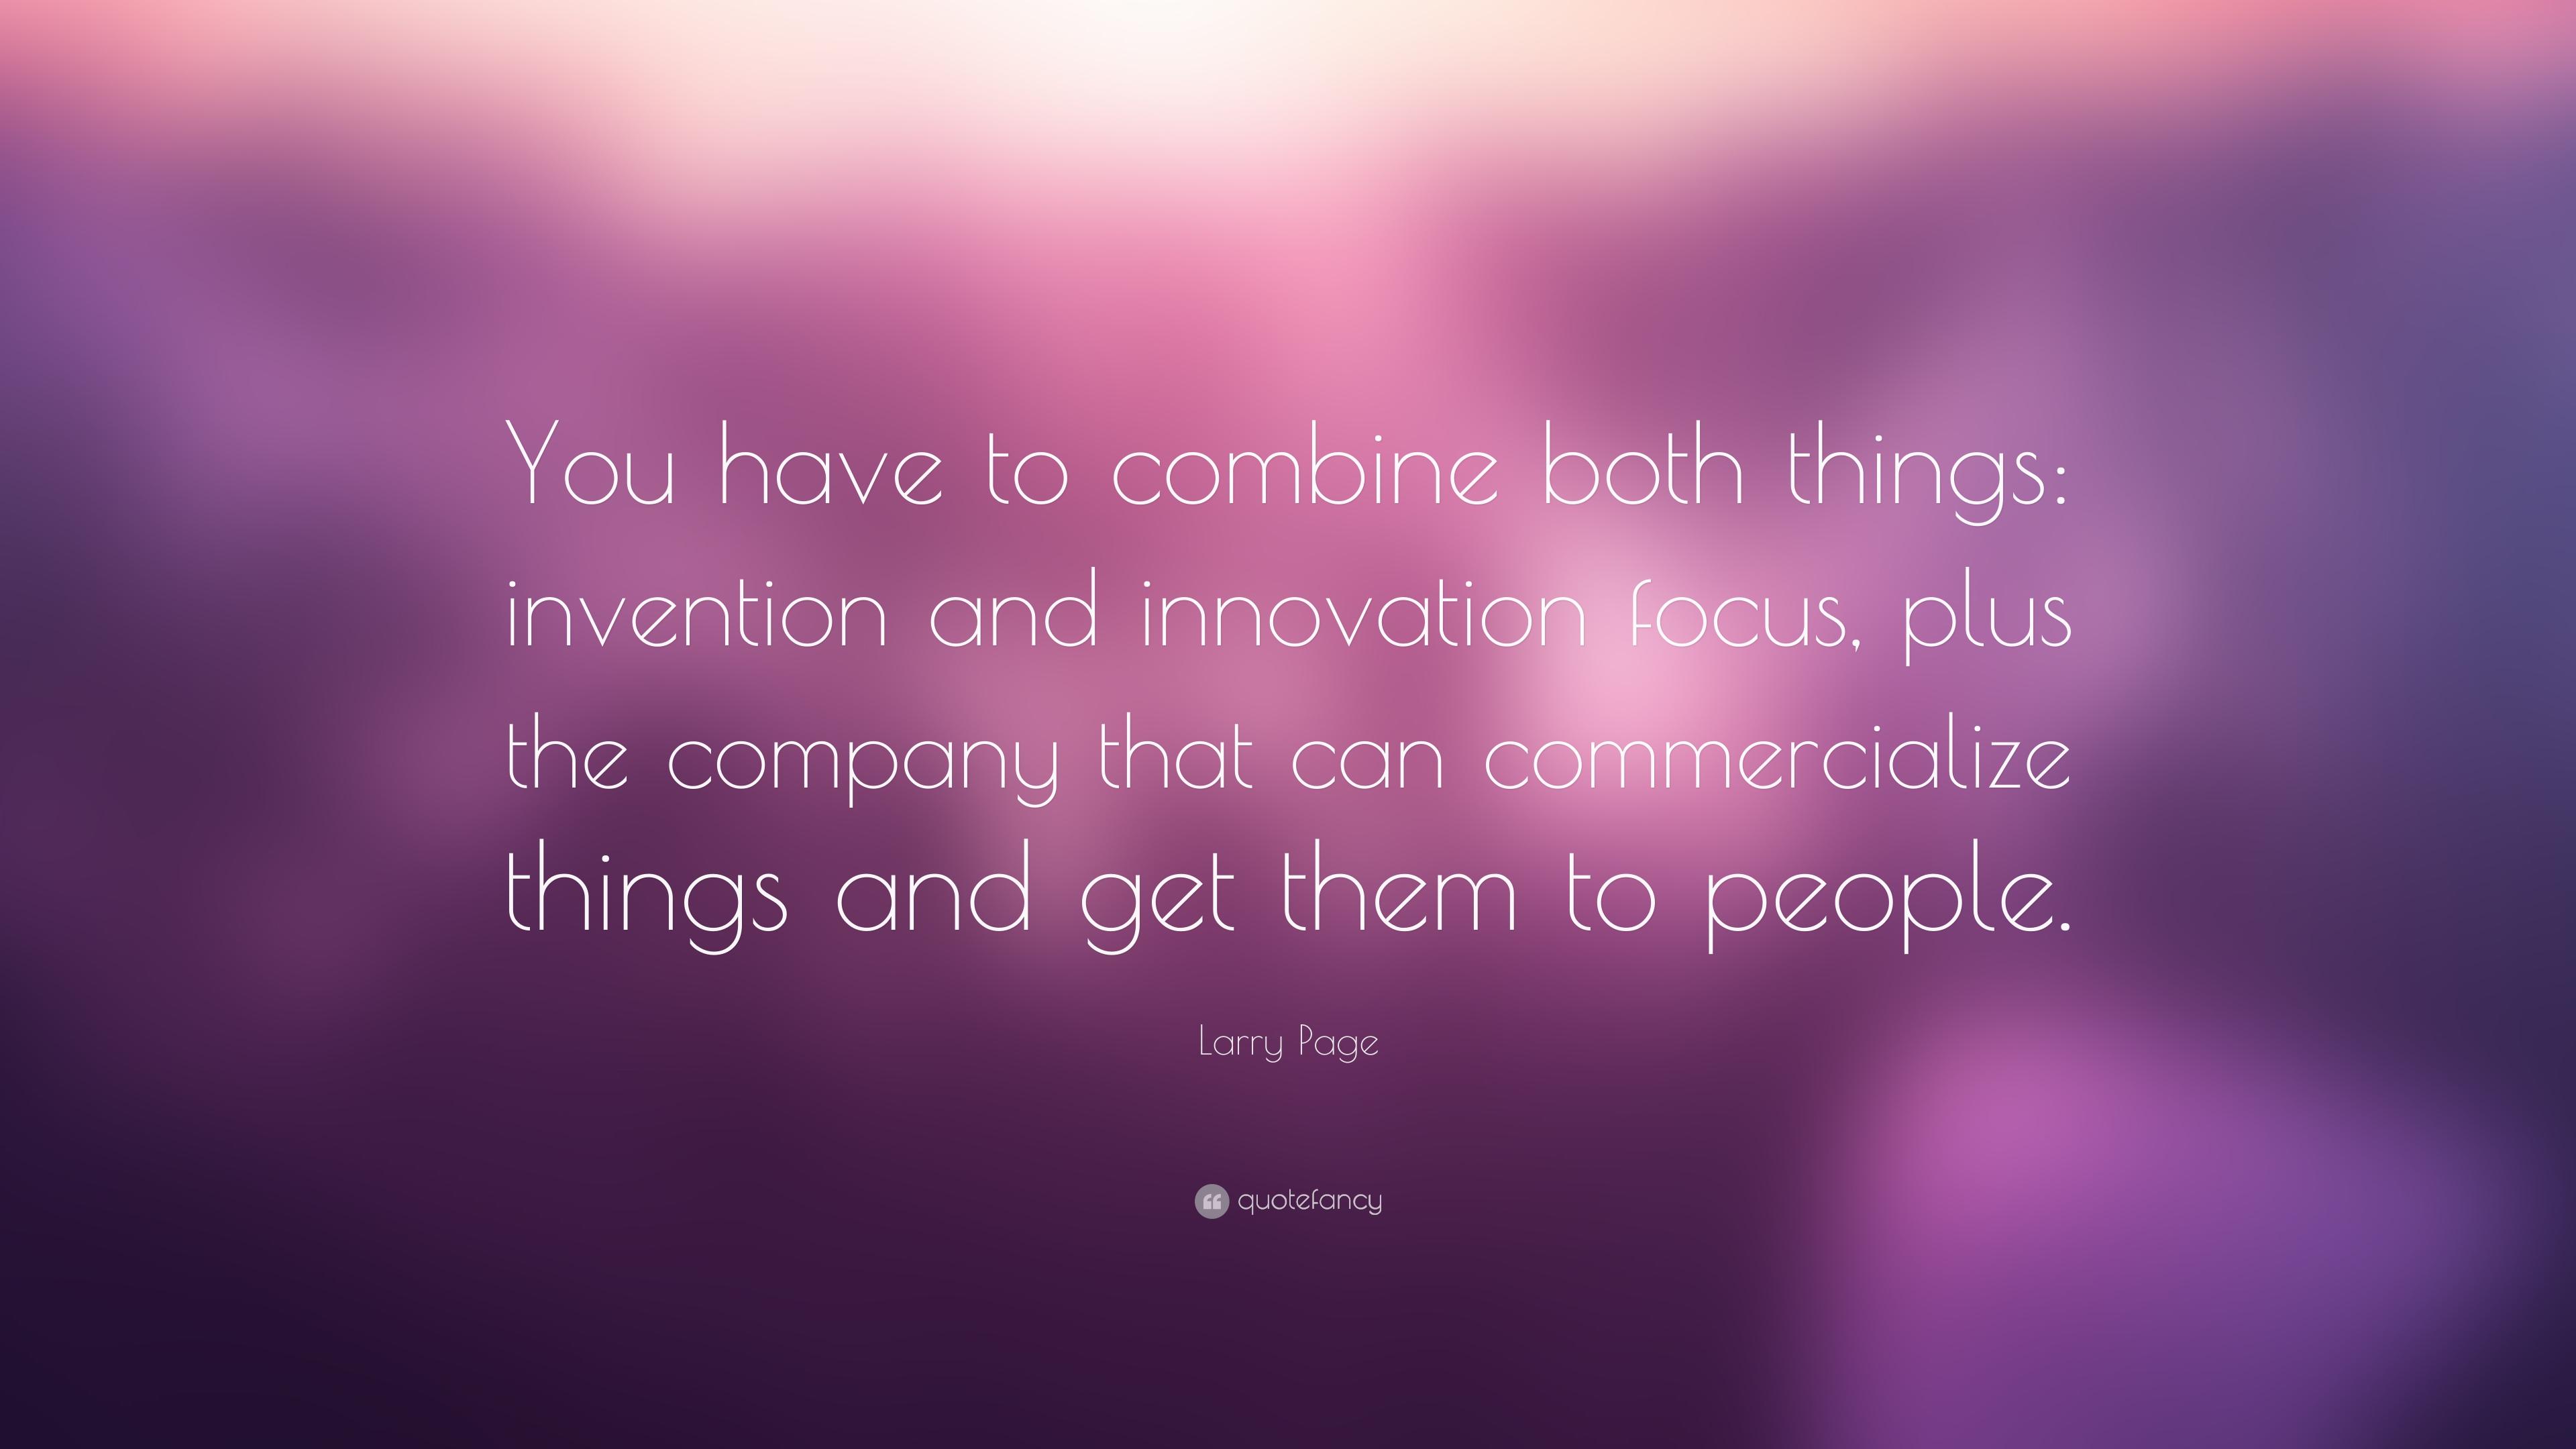 Larry Page Quote: “You have to combine both things: invention